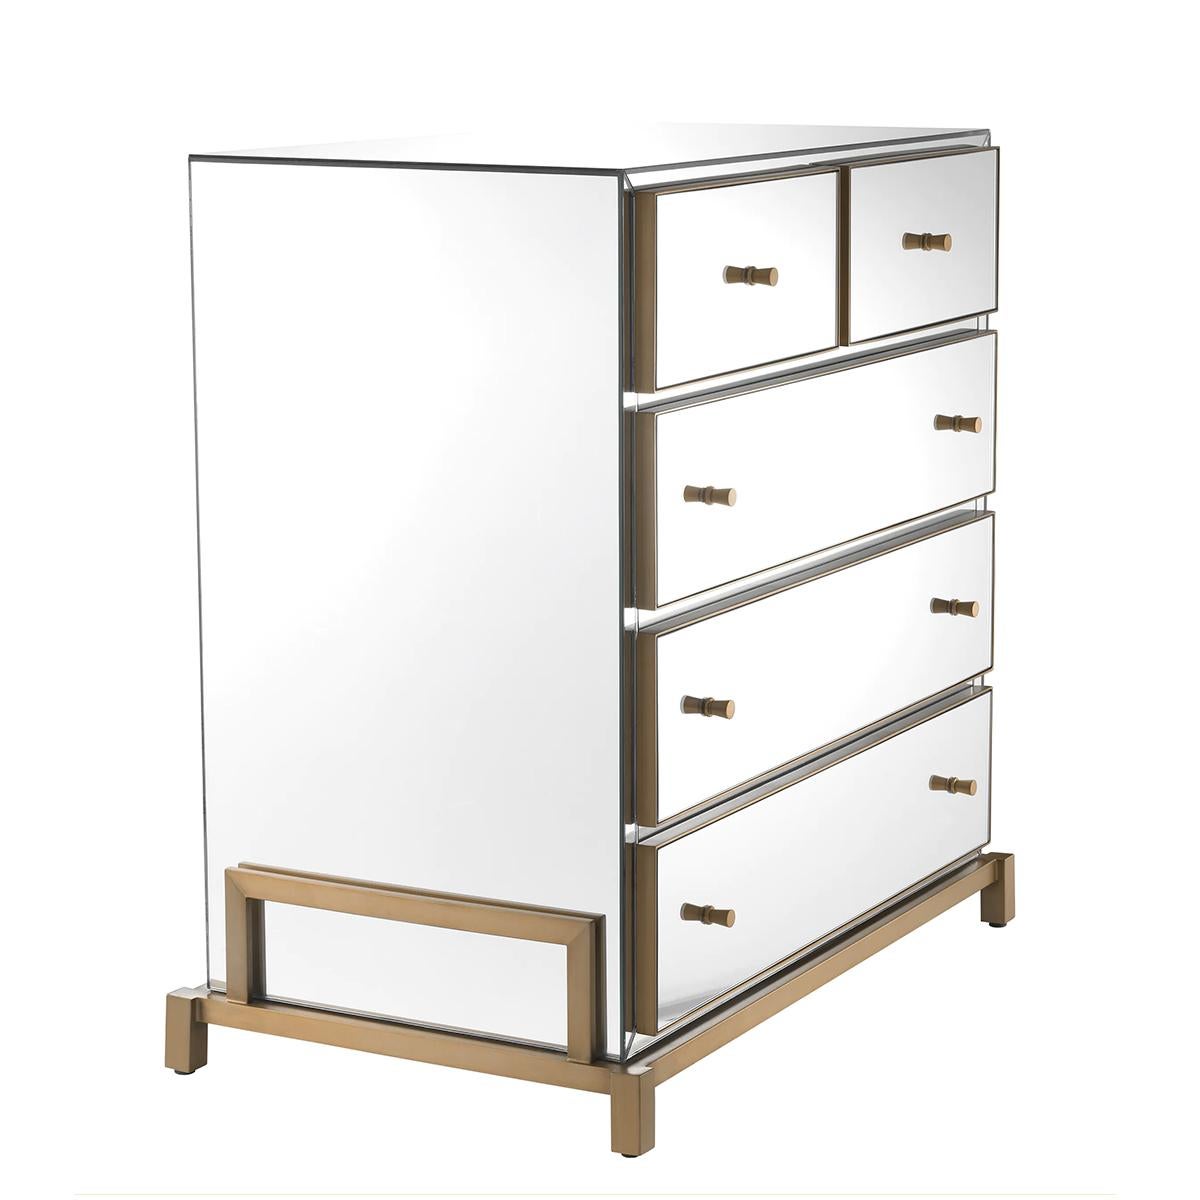 Chest of Drawers Sandy with wooden structure covered with
clear mirrored glass and with stainless steel structure in brushed
brass finish. With 5 drawers with easy glide system.